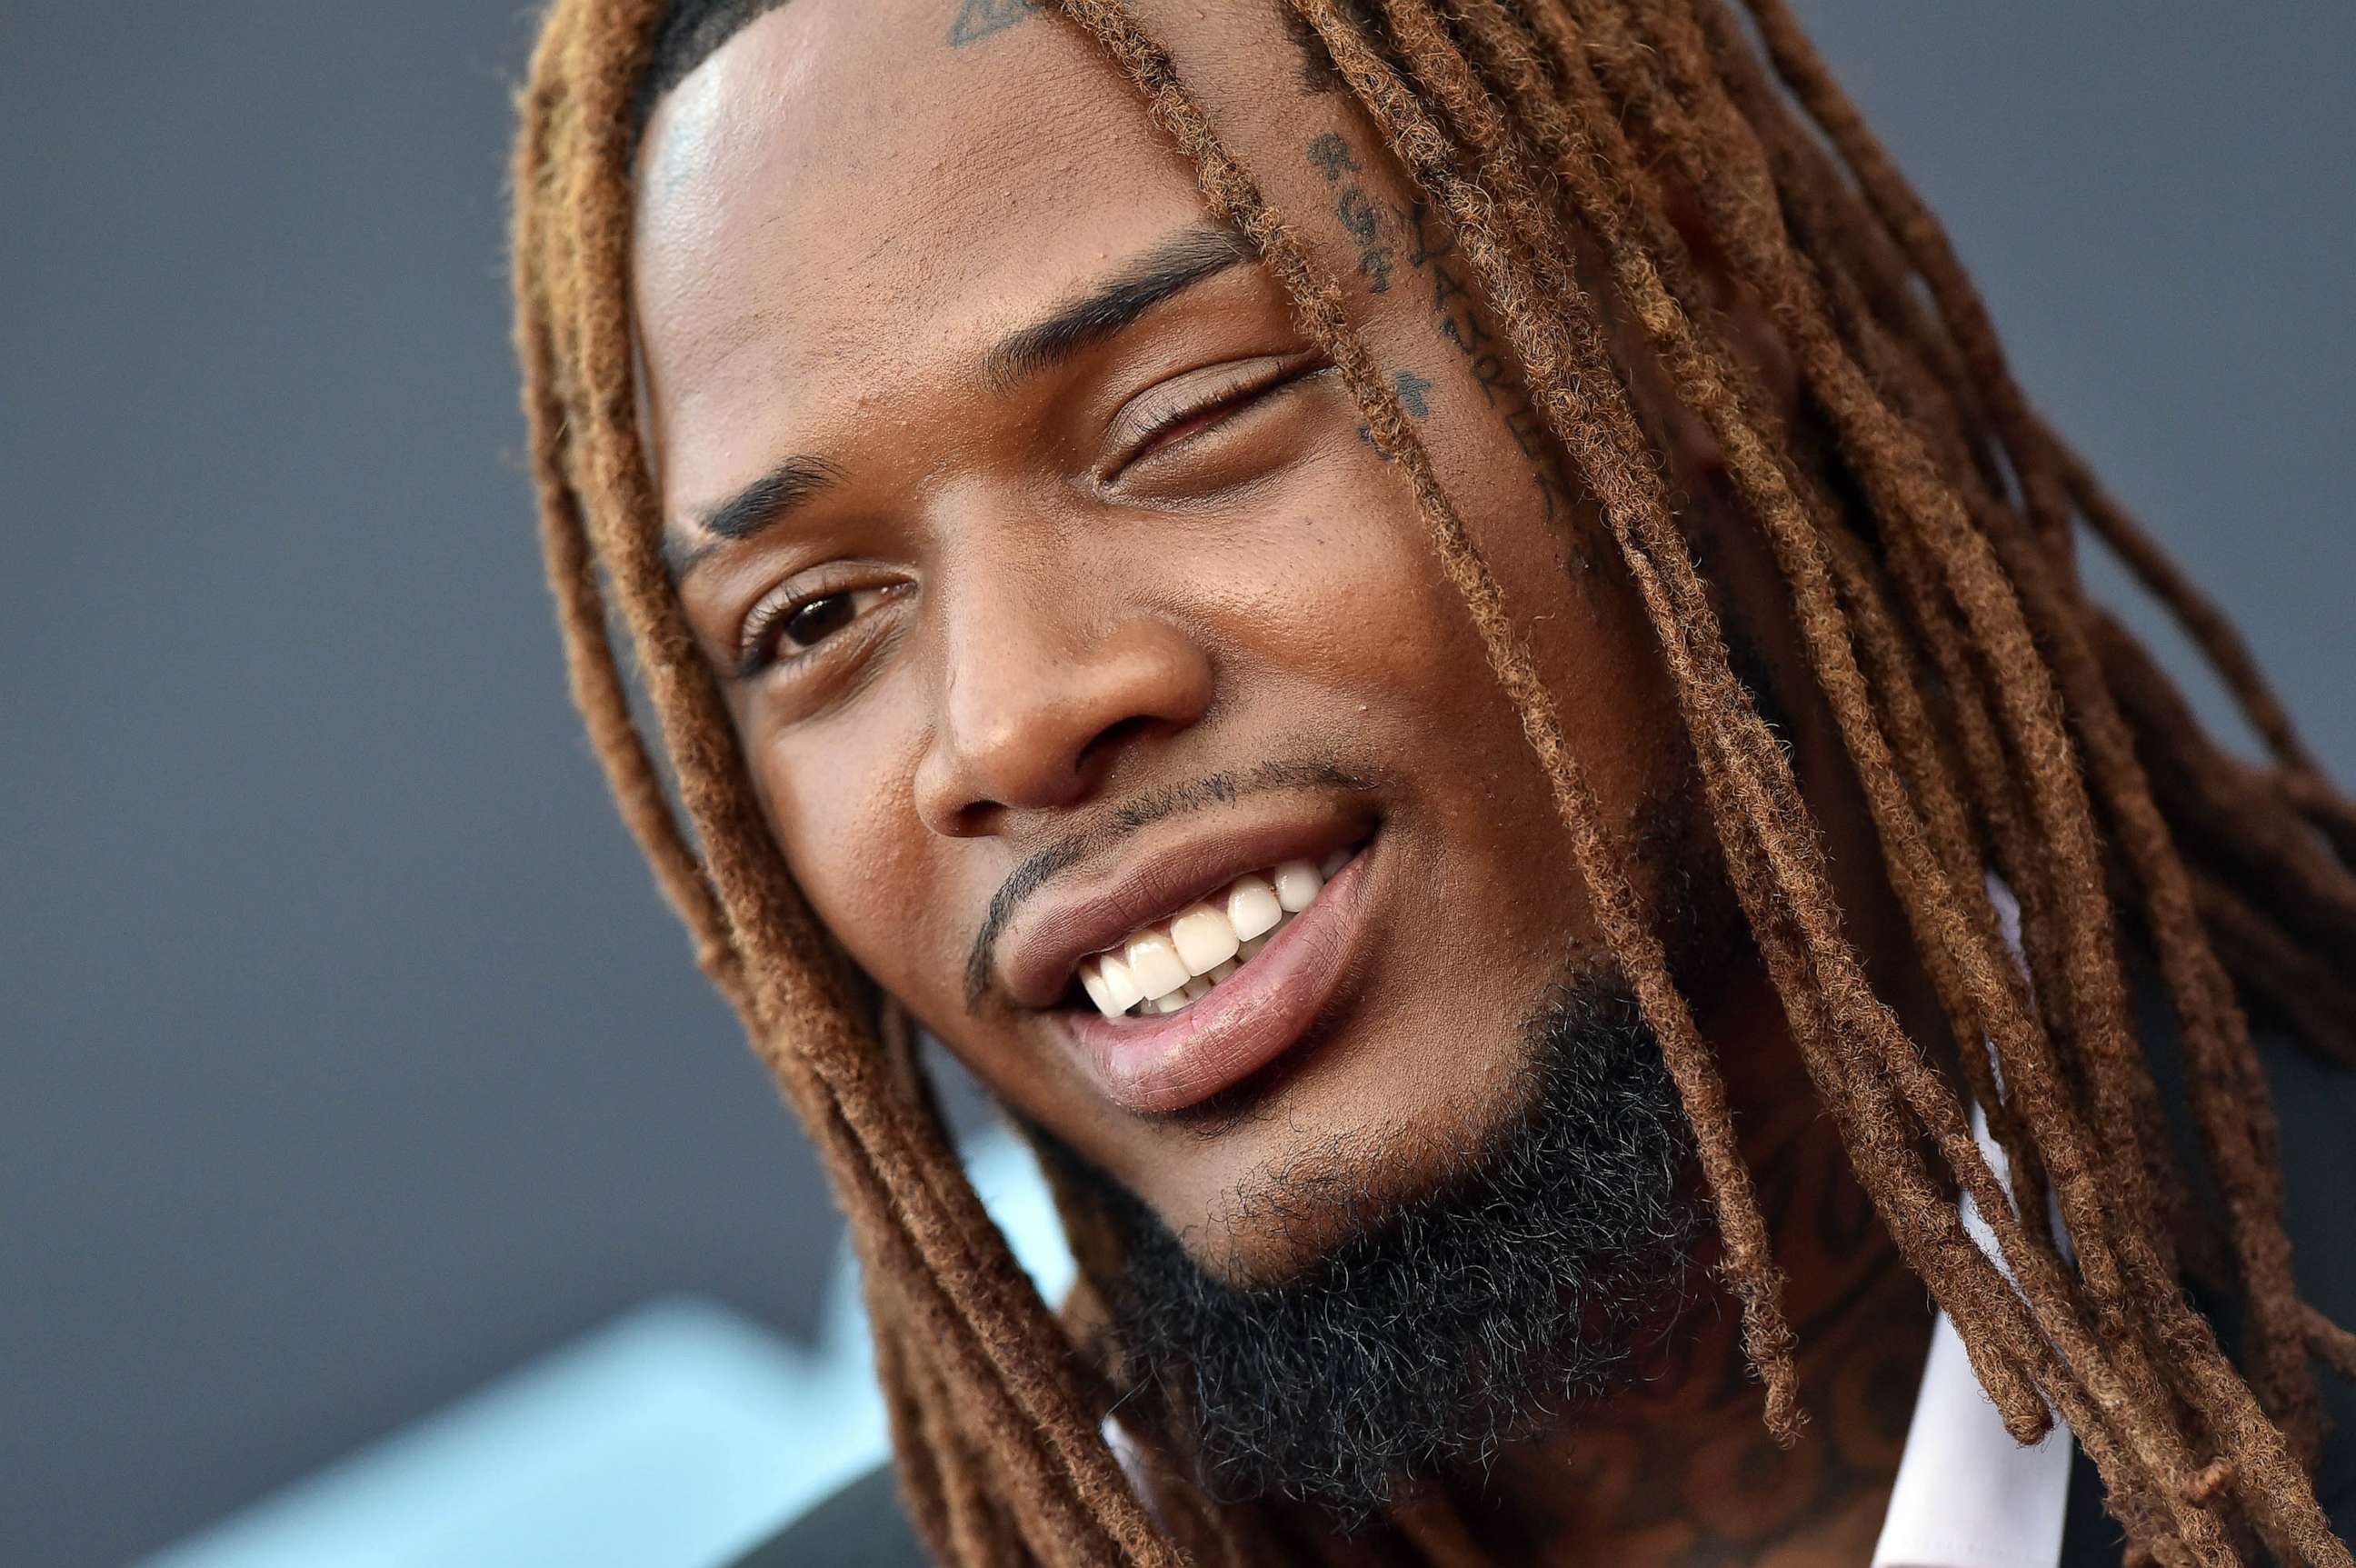 PHOTO: Fetty Wap attends the 2019 MTV Video Music Awards at Prudential Center, Aug. 26, 2019 in Newark, NJ.